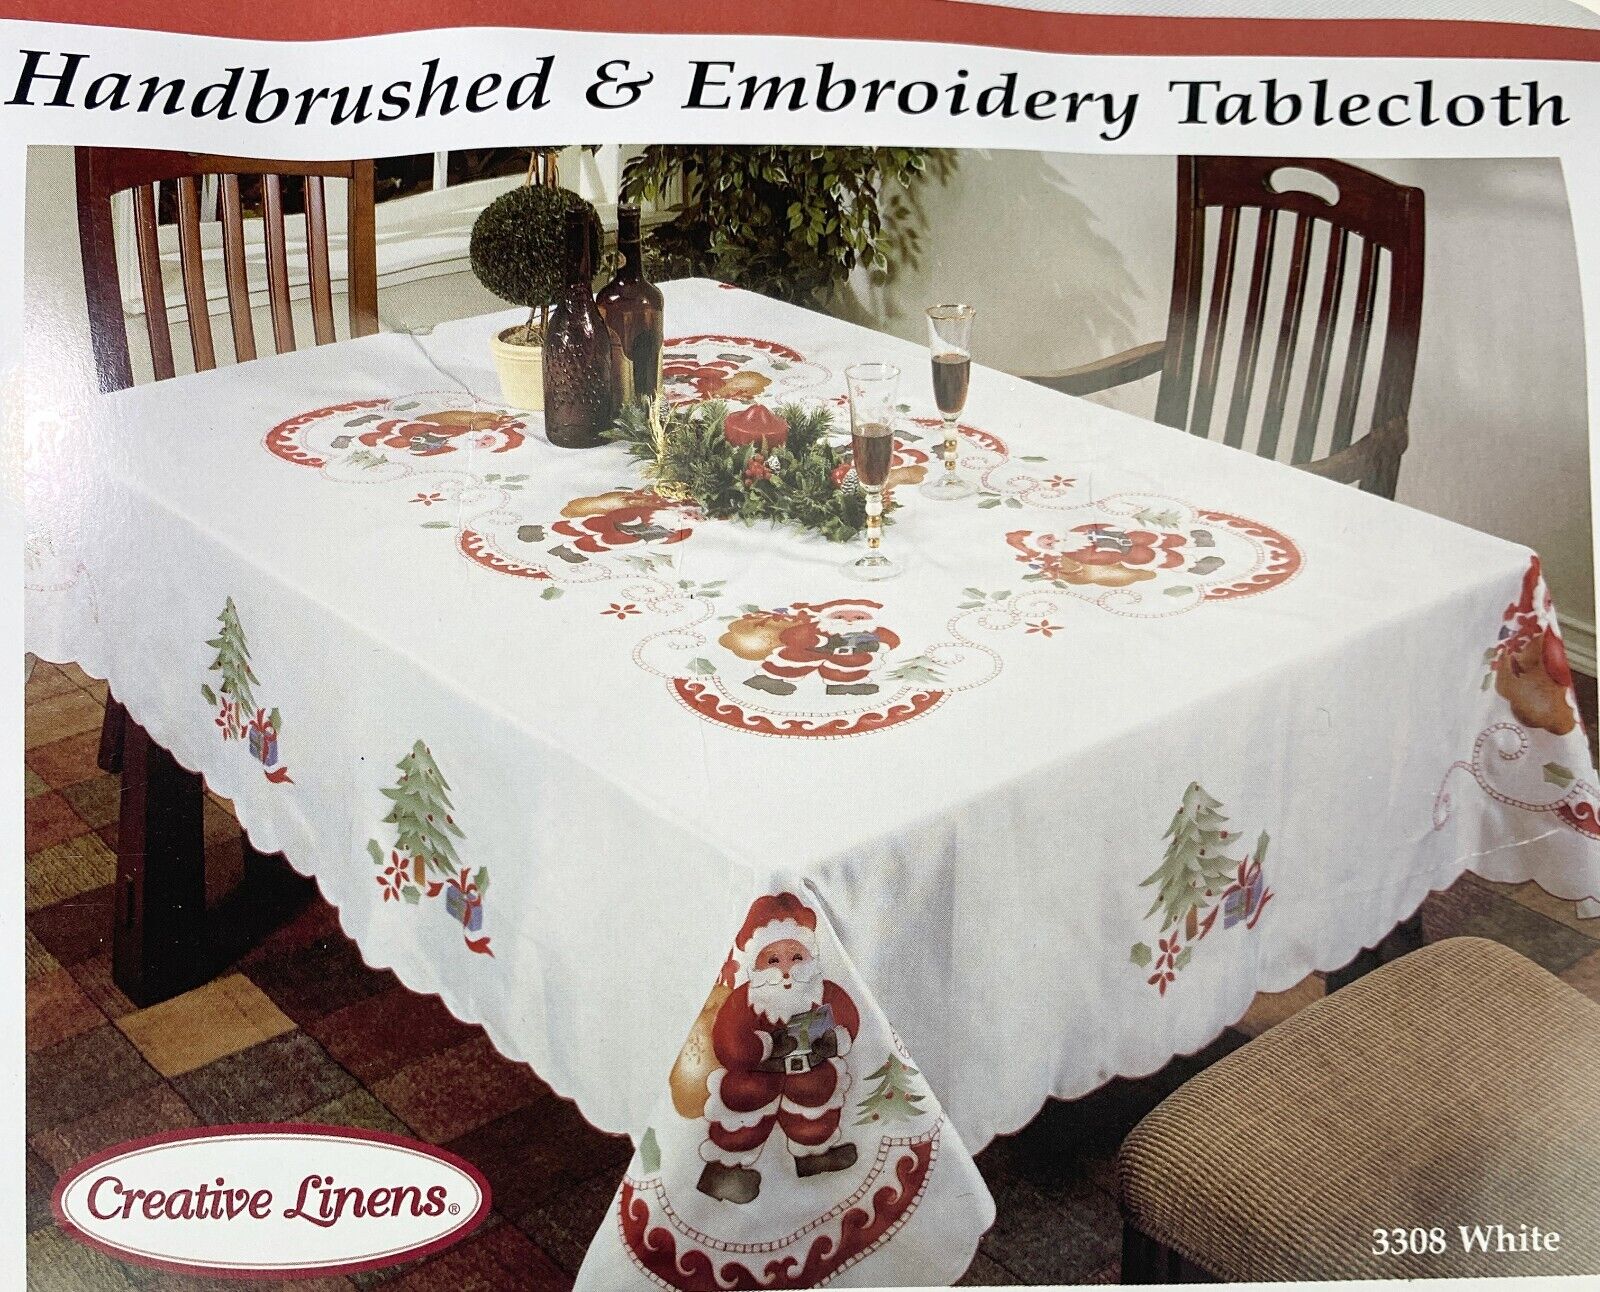 Creative Linens Hand Brushed Embroidery Tablecloth Santa Christmas Holiday